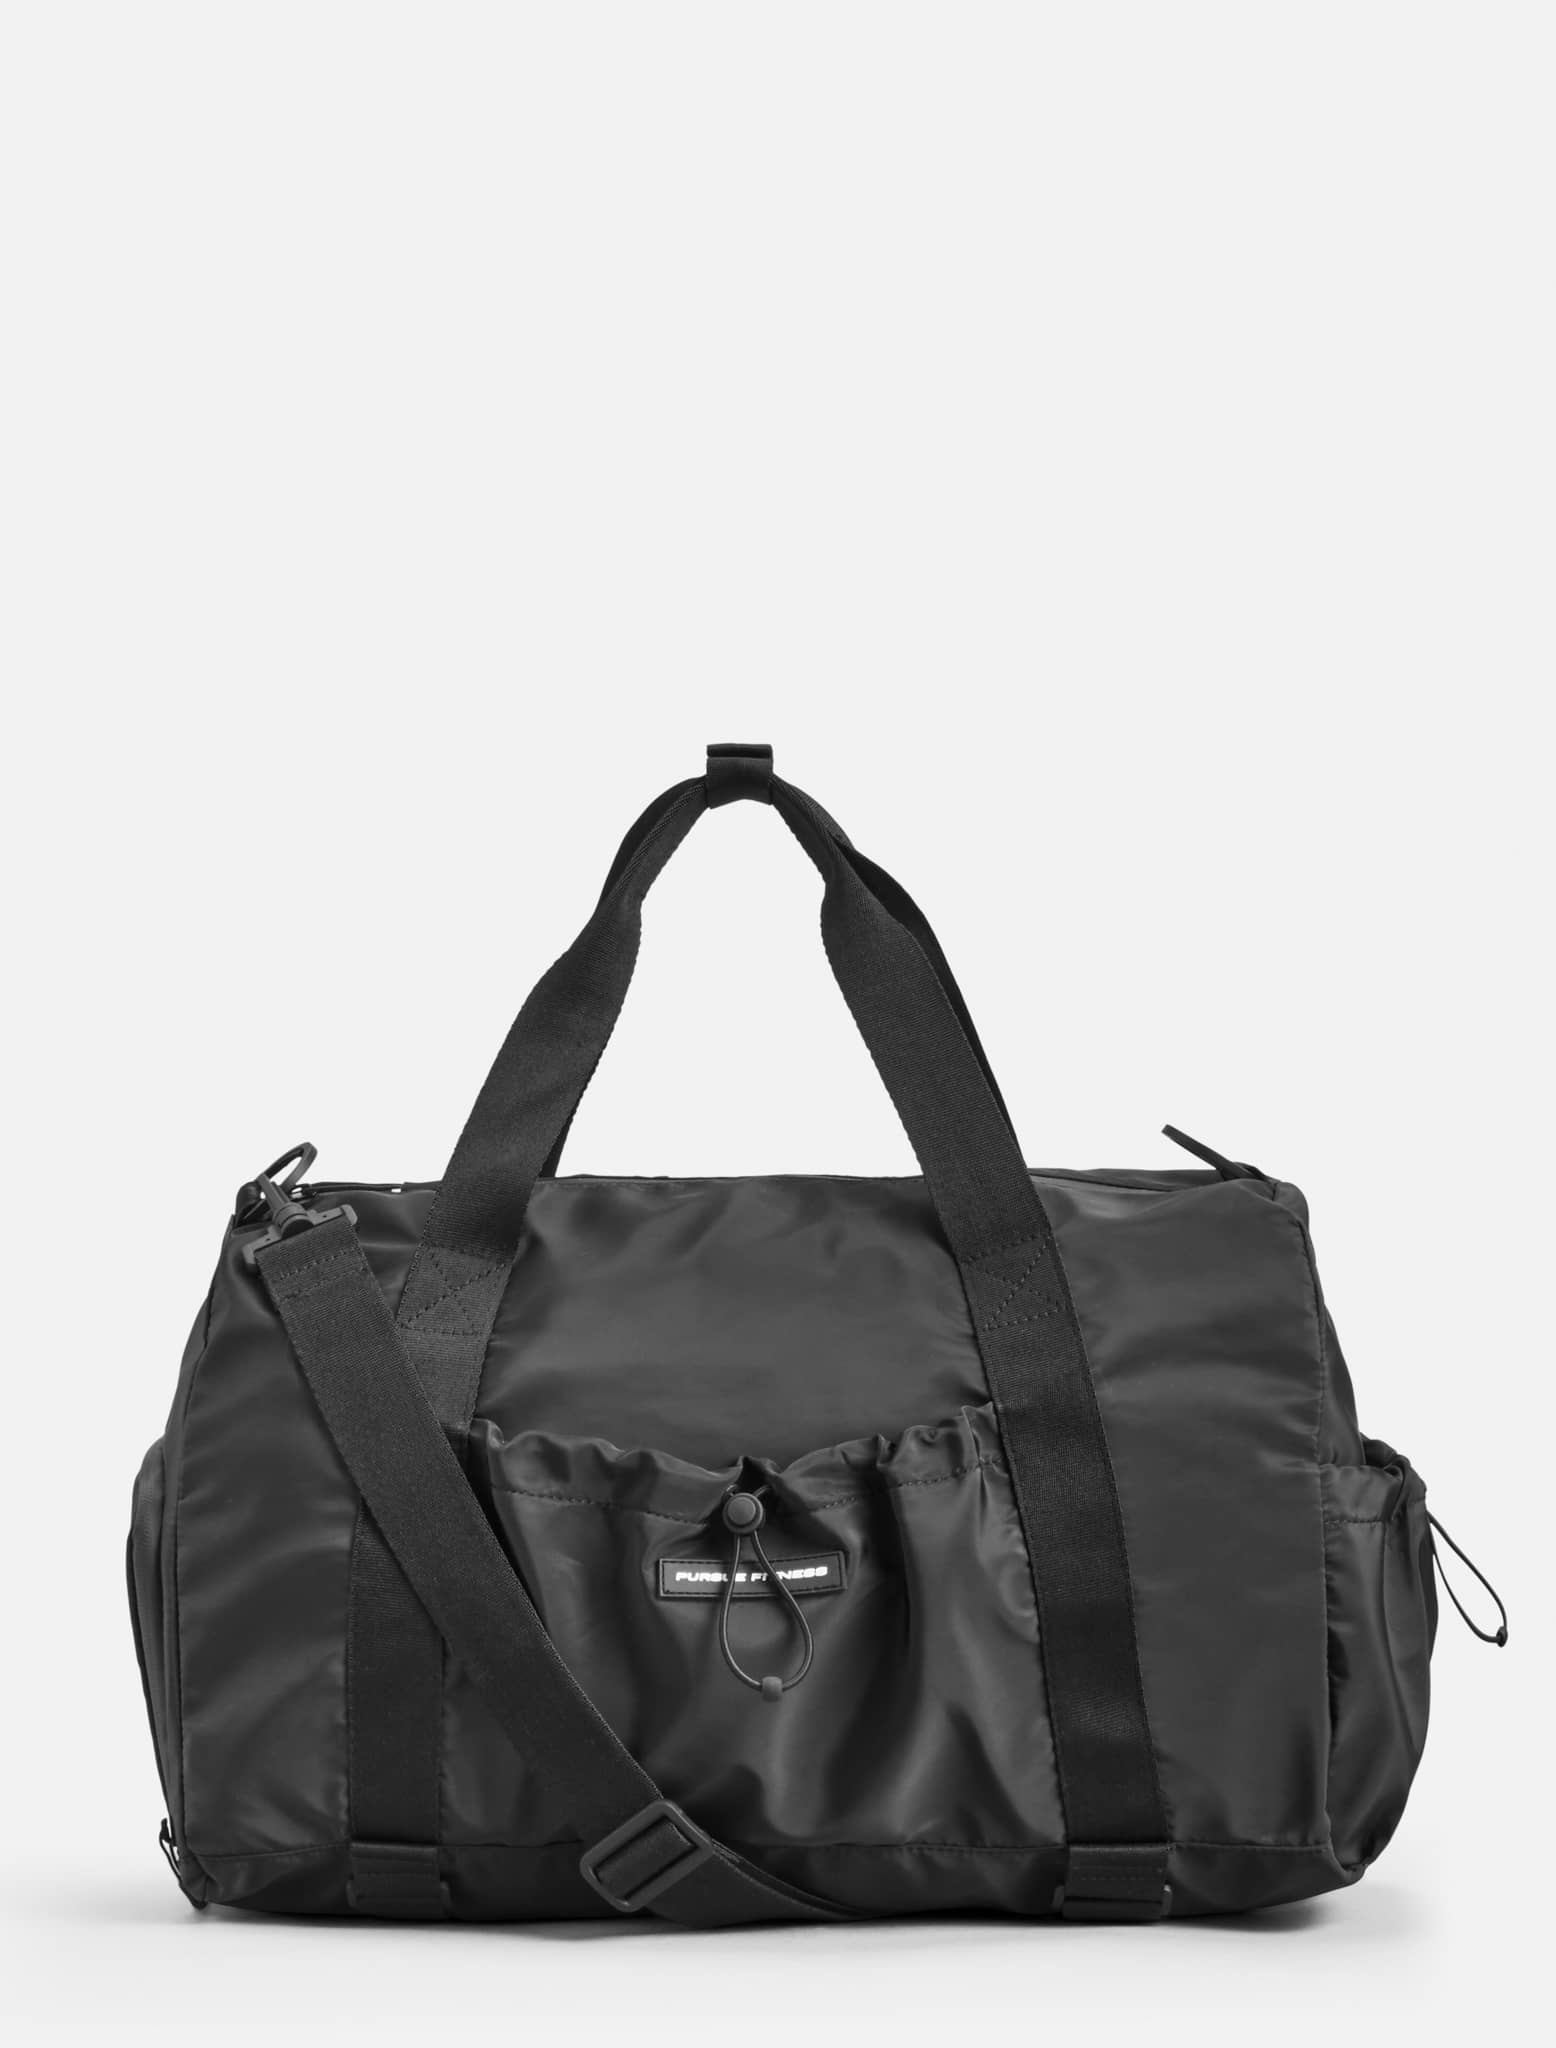 The Holdall / Black Pursue Fitness 1